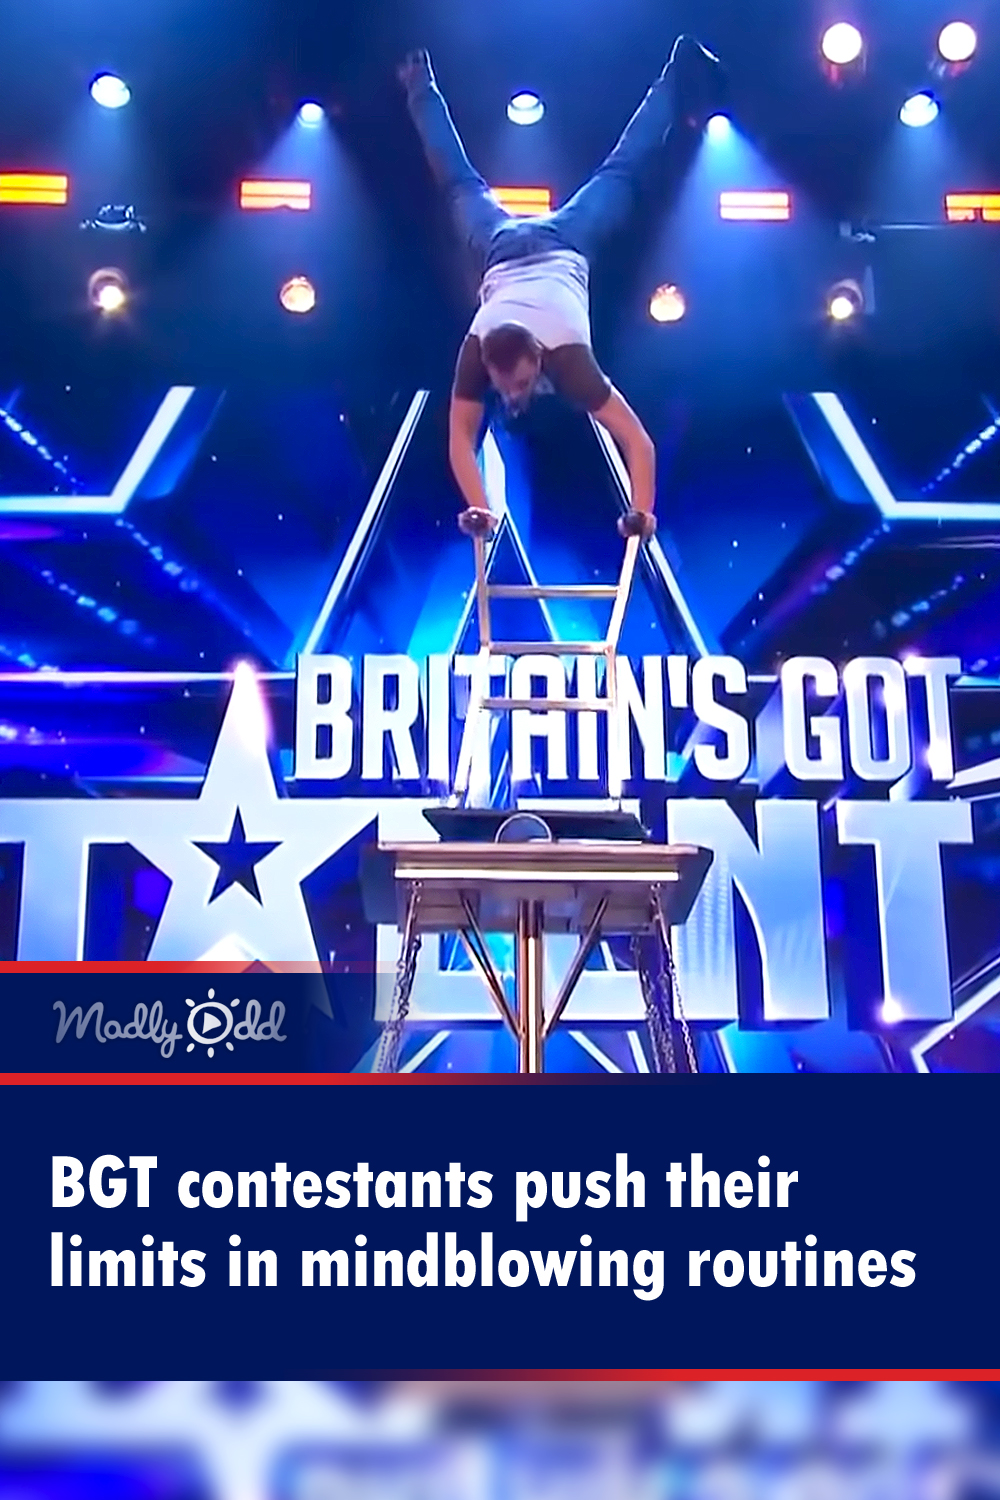 BGT contestants push their limits in mindblowing routines